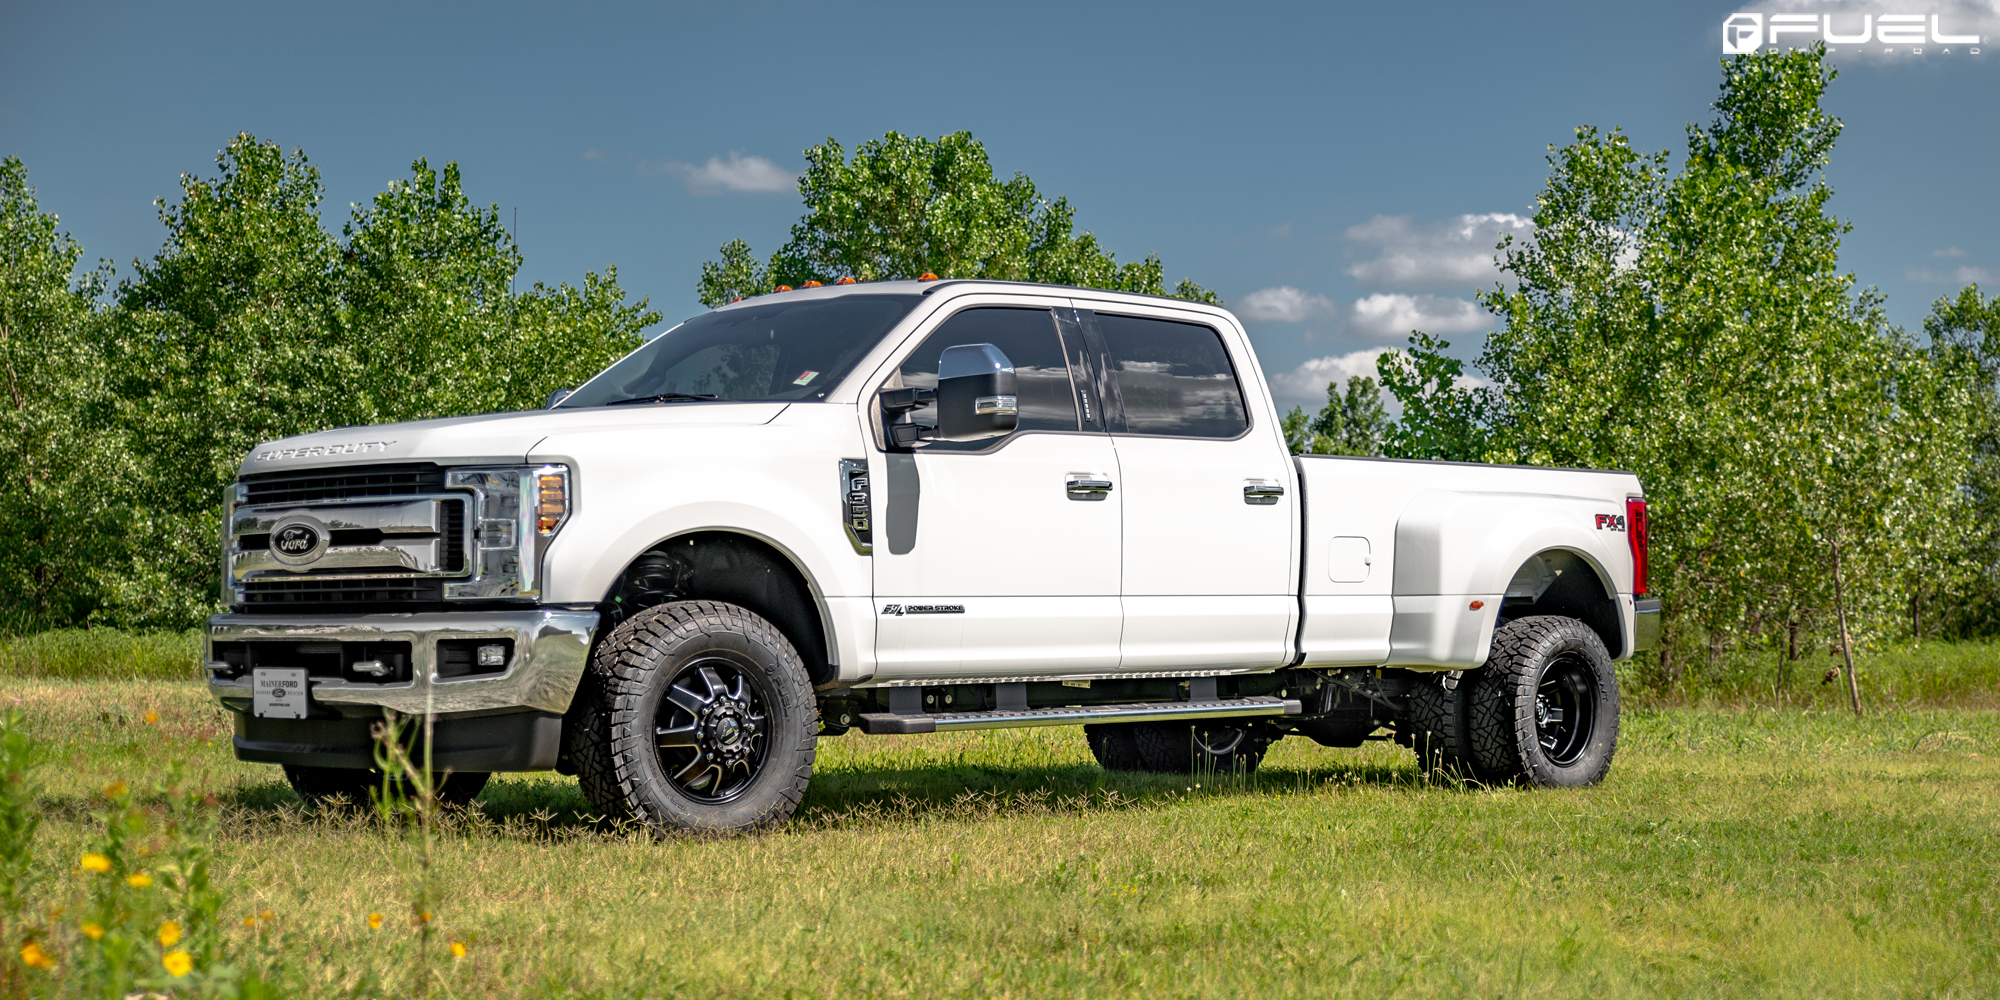 ford-f-350-super-duty-maverick-dually-front-d538-8-lug-gallery-fuel